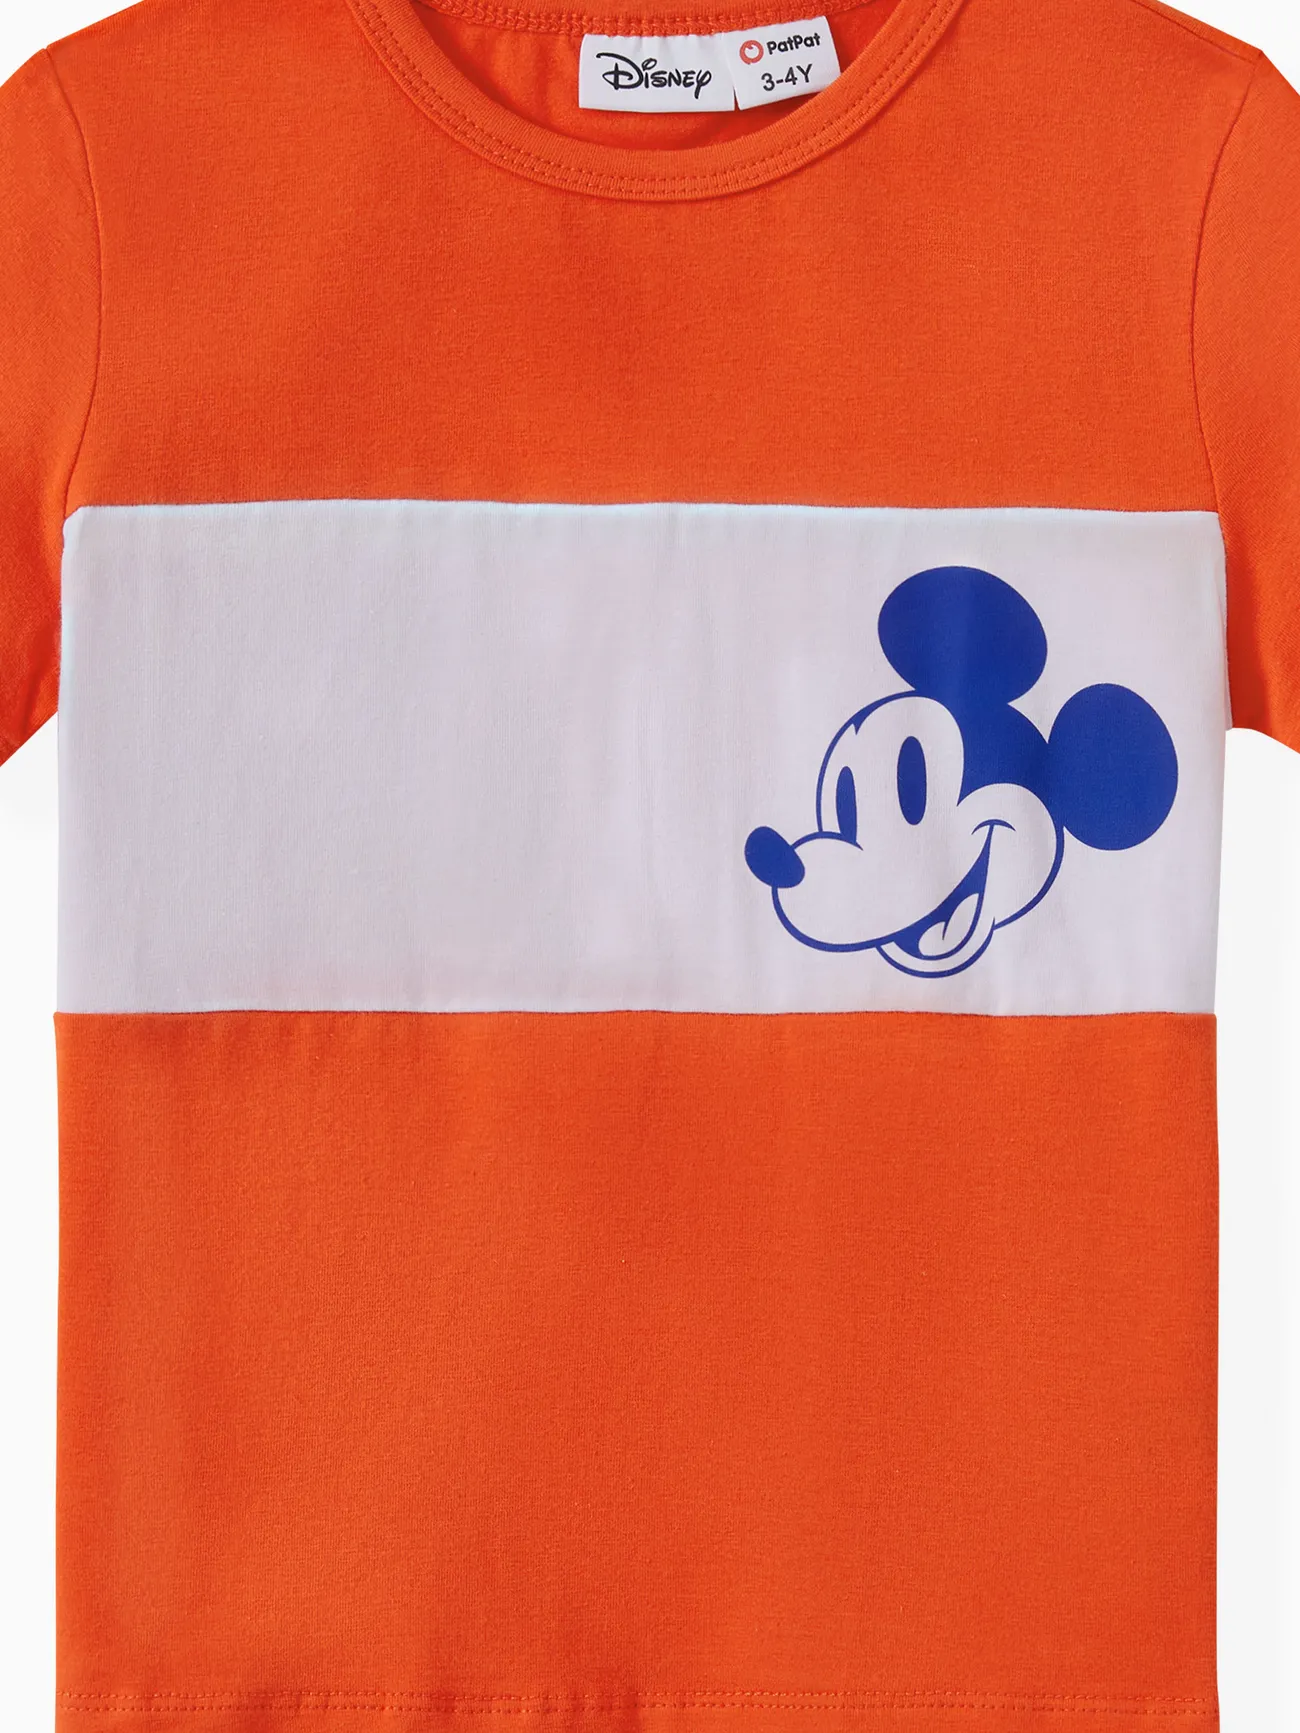 Disney Mickey and Friends Familien-Looks Tanktop Familien-Outfits Sets Orangerot big image 1